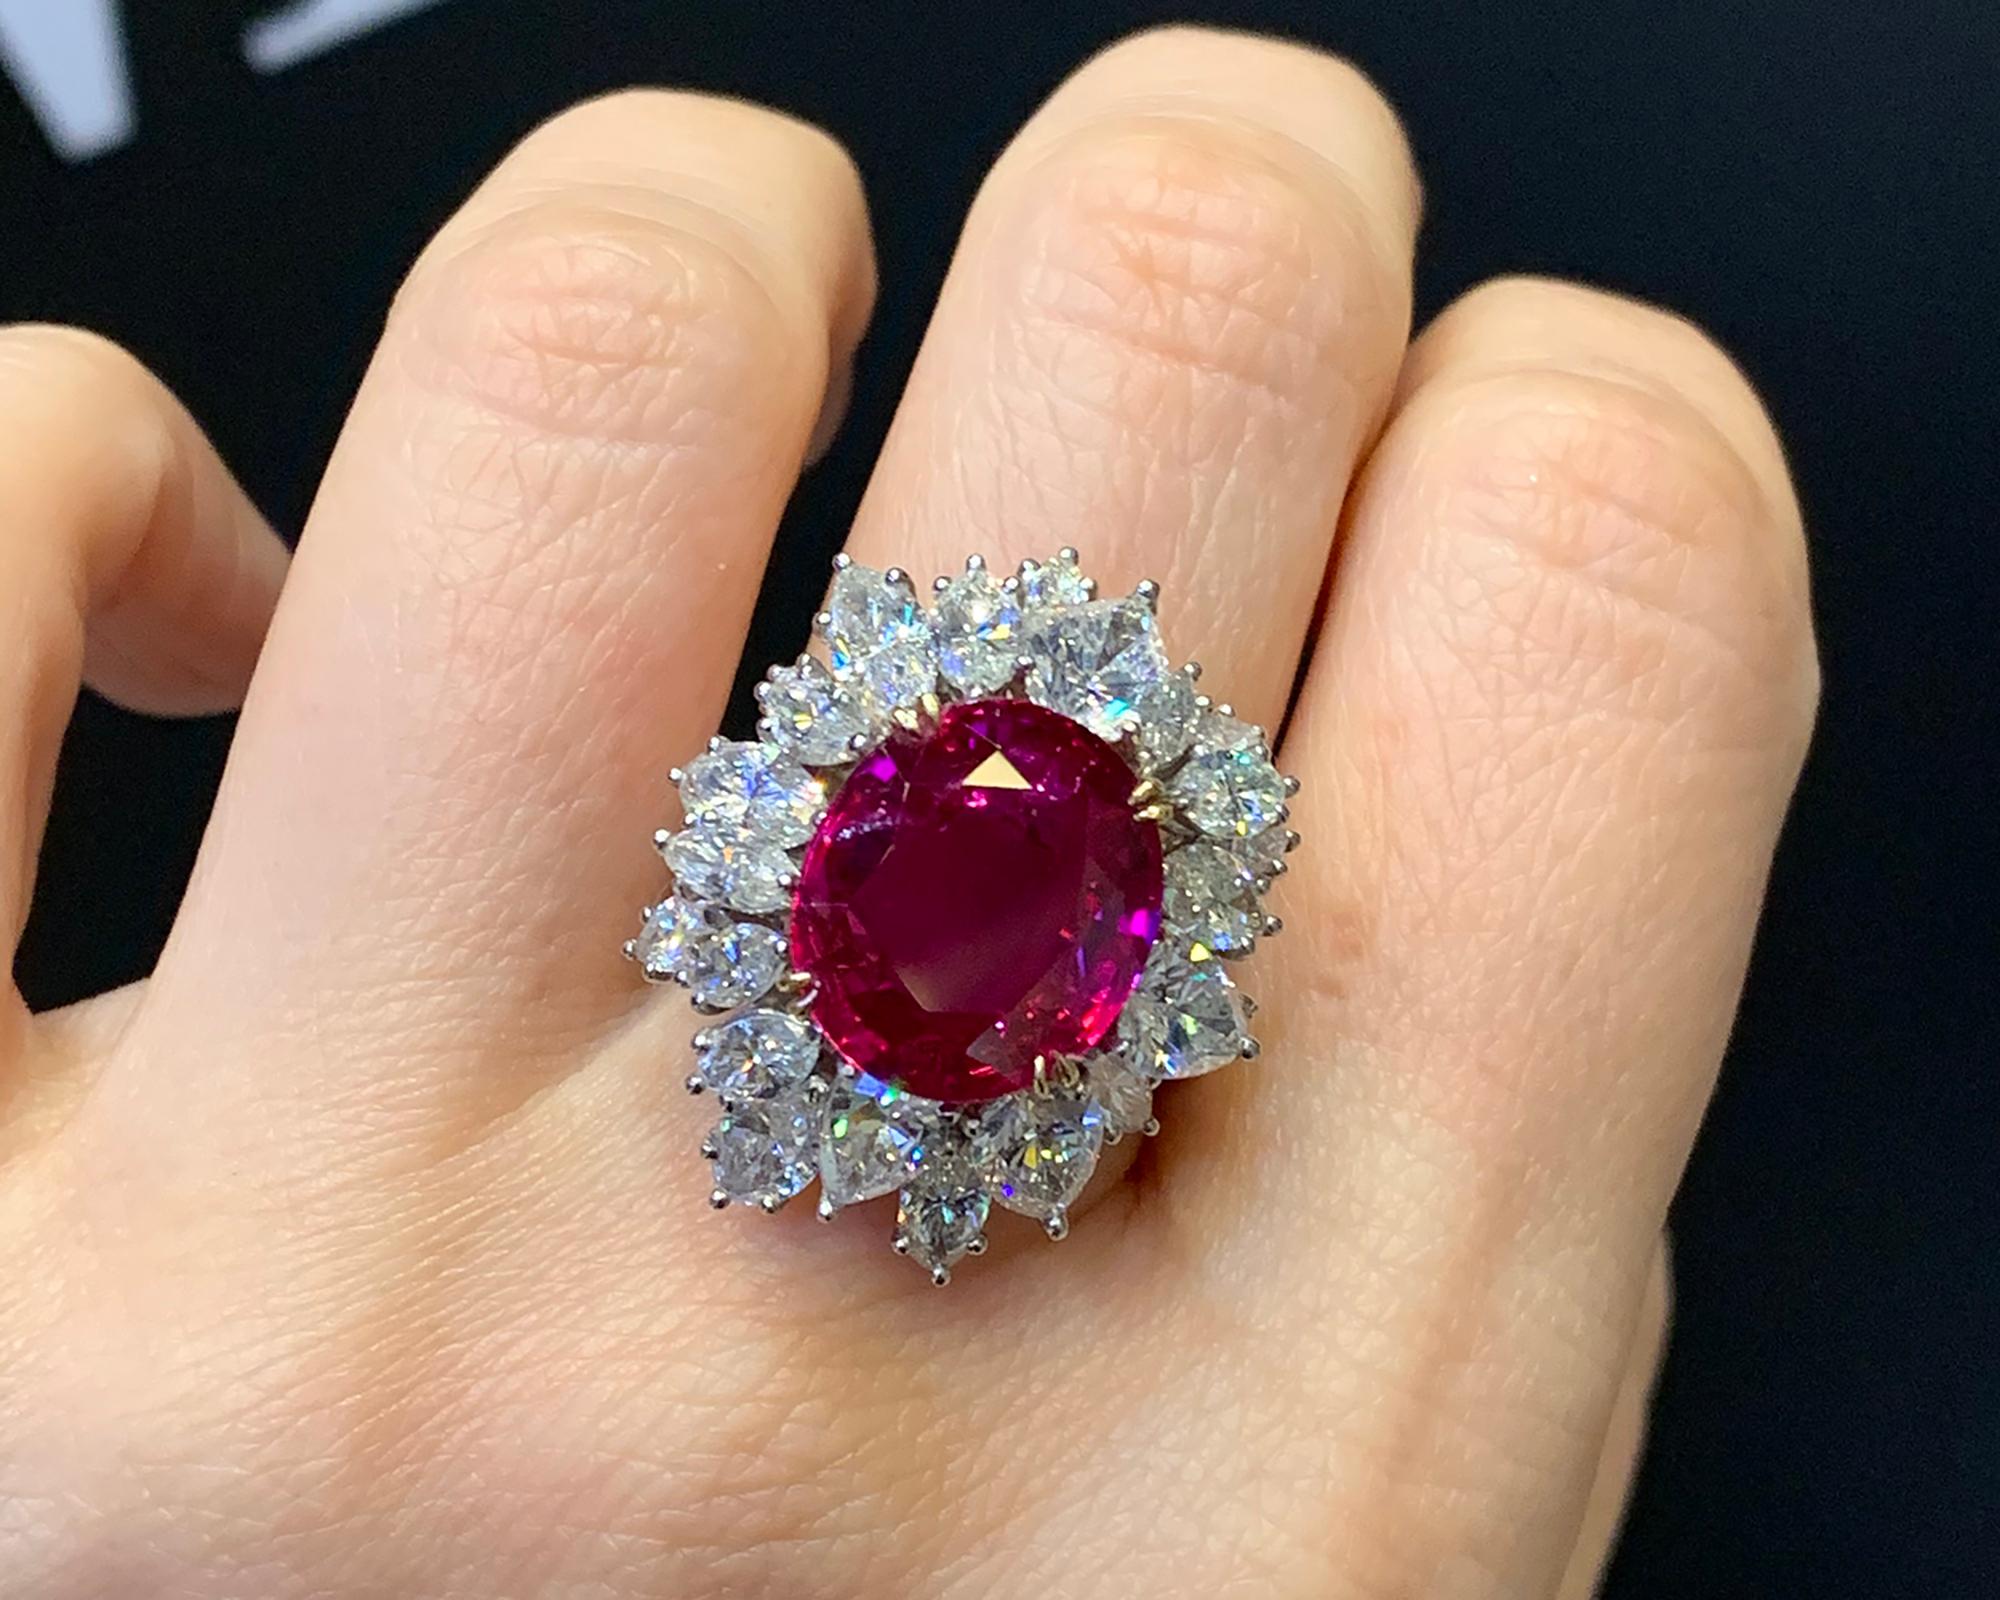 Spectra Fine Jewelry, Certified 7.91 Carat Burmese Ruby Diamond Cocktail Ring For Sale 1